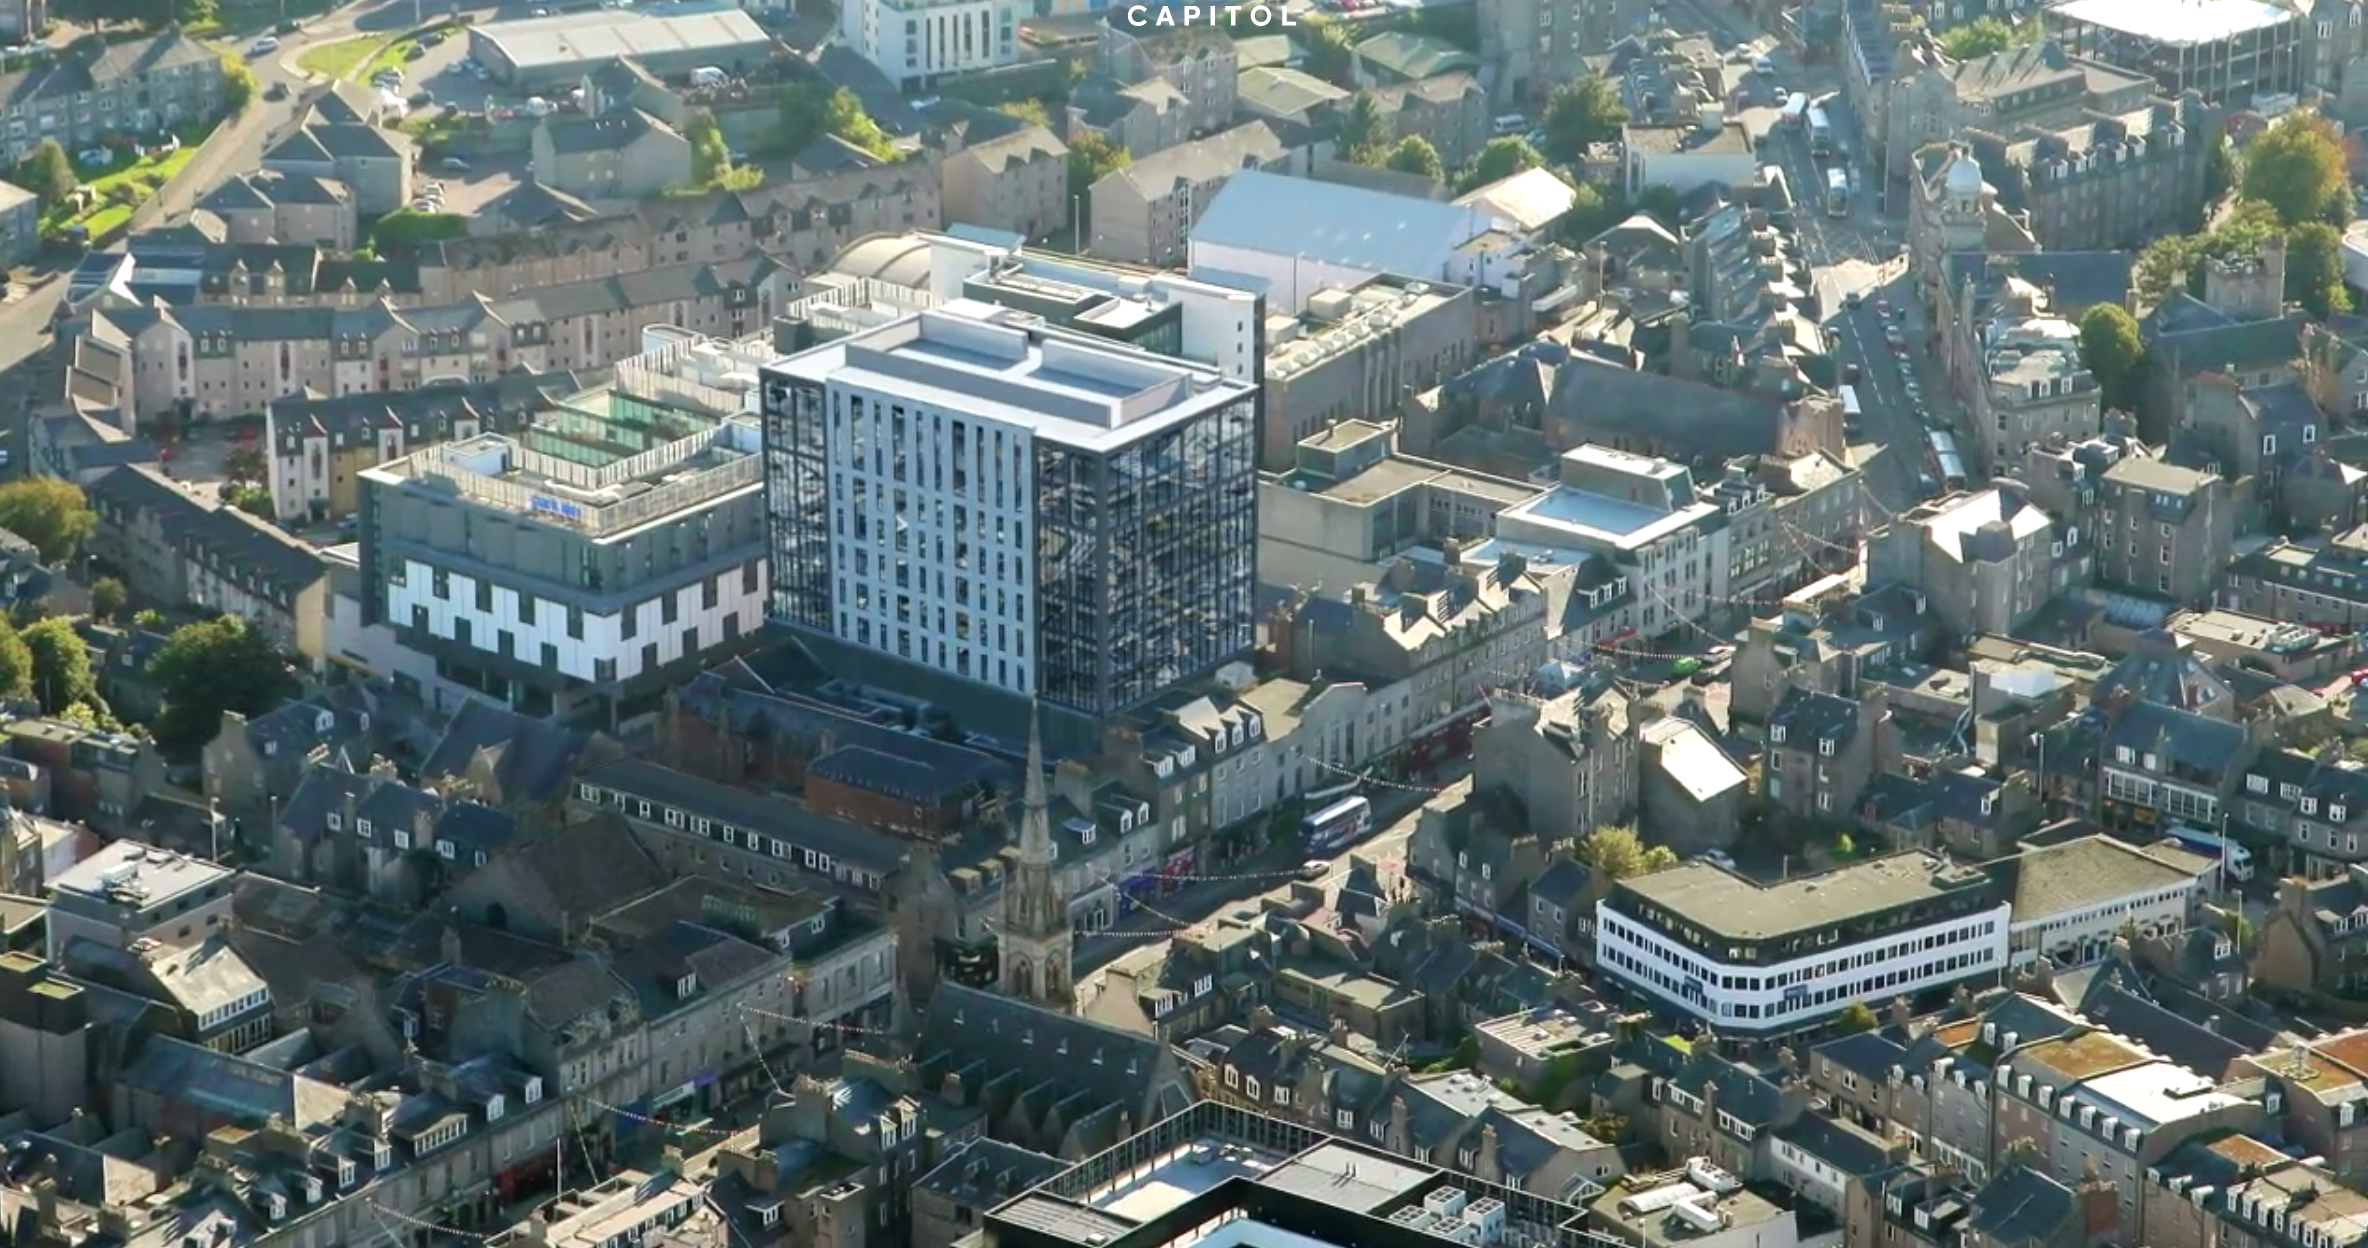 An artist impression of how the building will look when finished set against the surrounding area